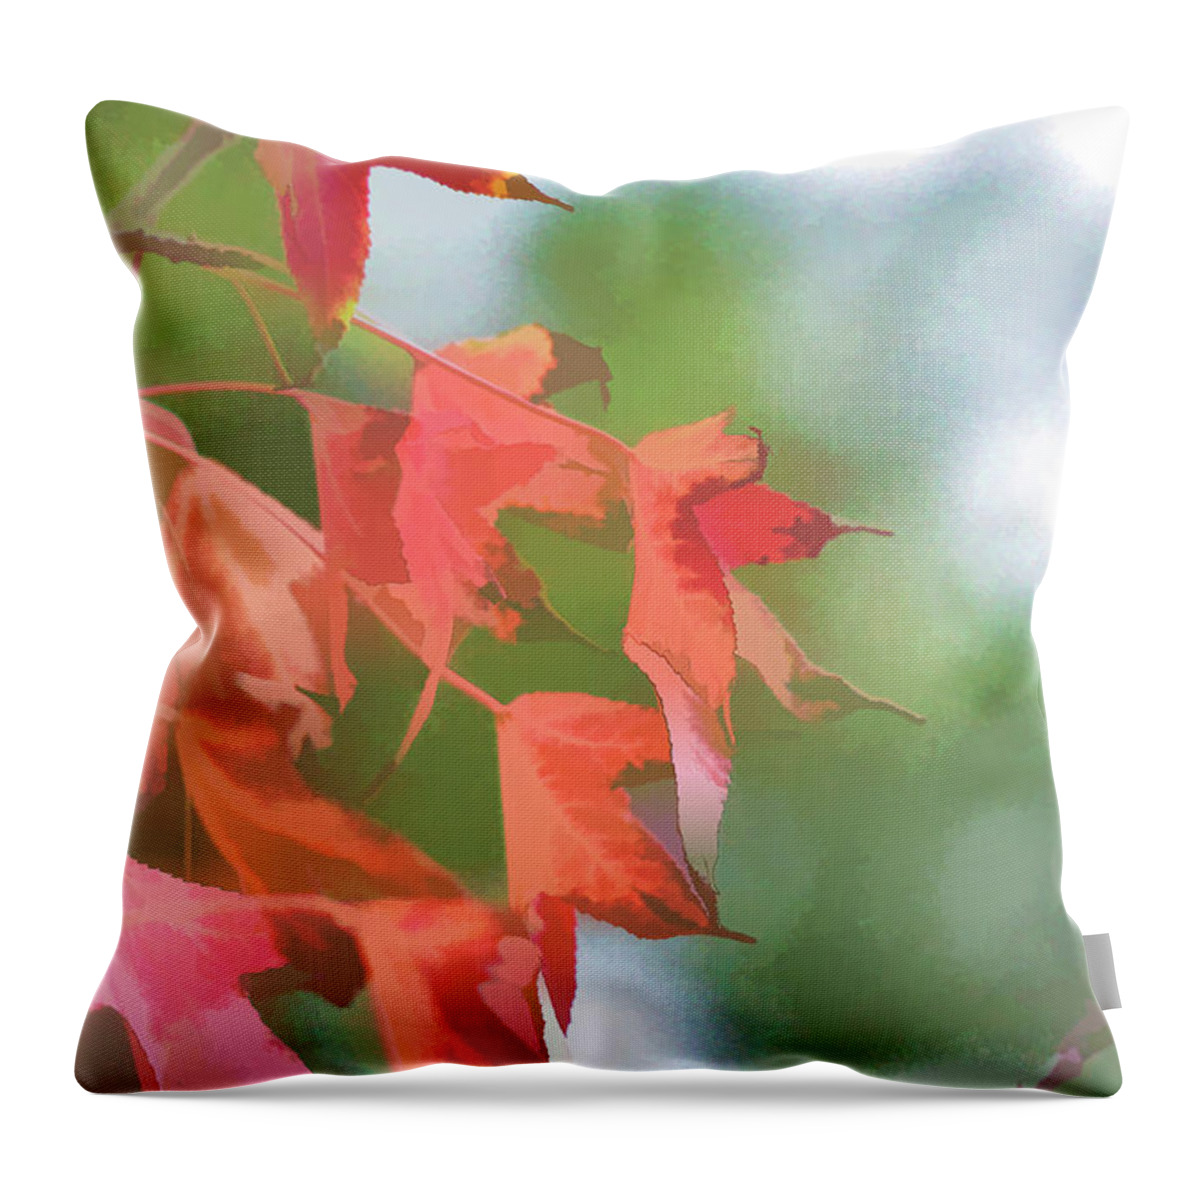 Linda Brody Throw Pillow featuring the digital art Leaves Macro 2 Abstract 1 by Linda Brody